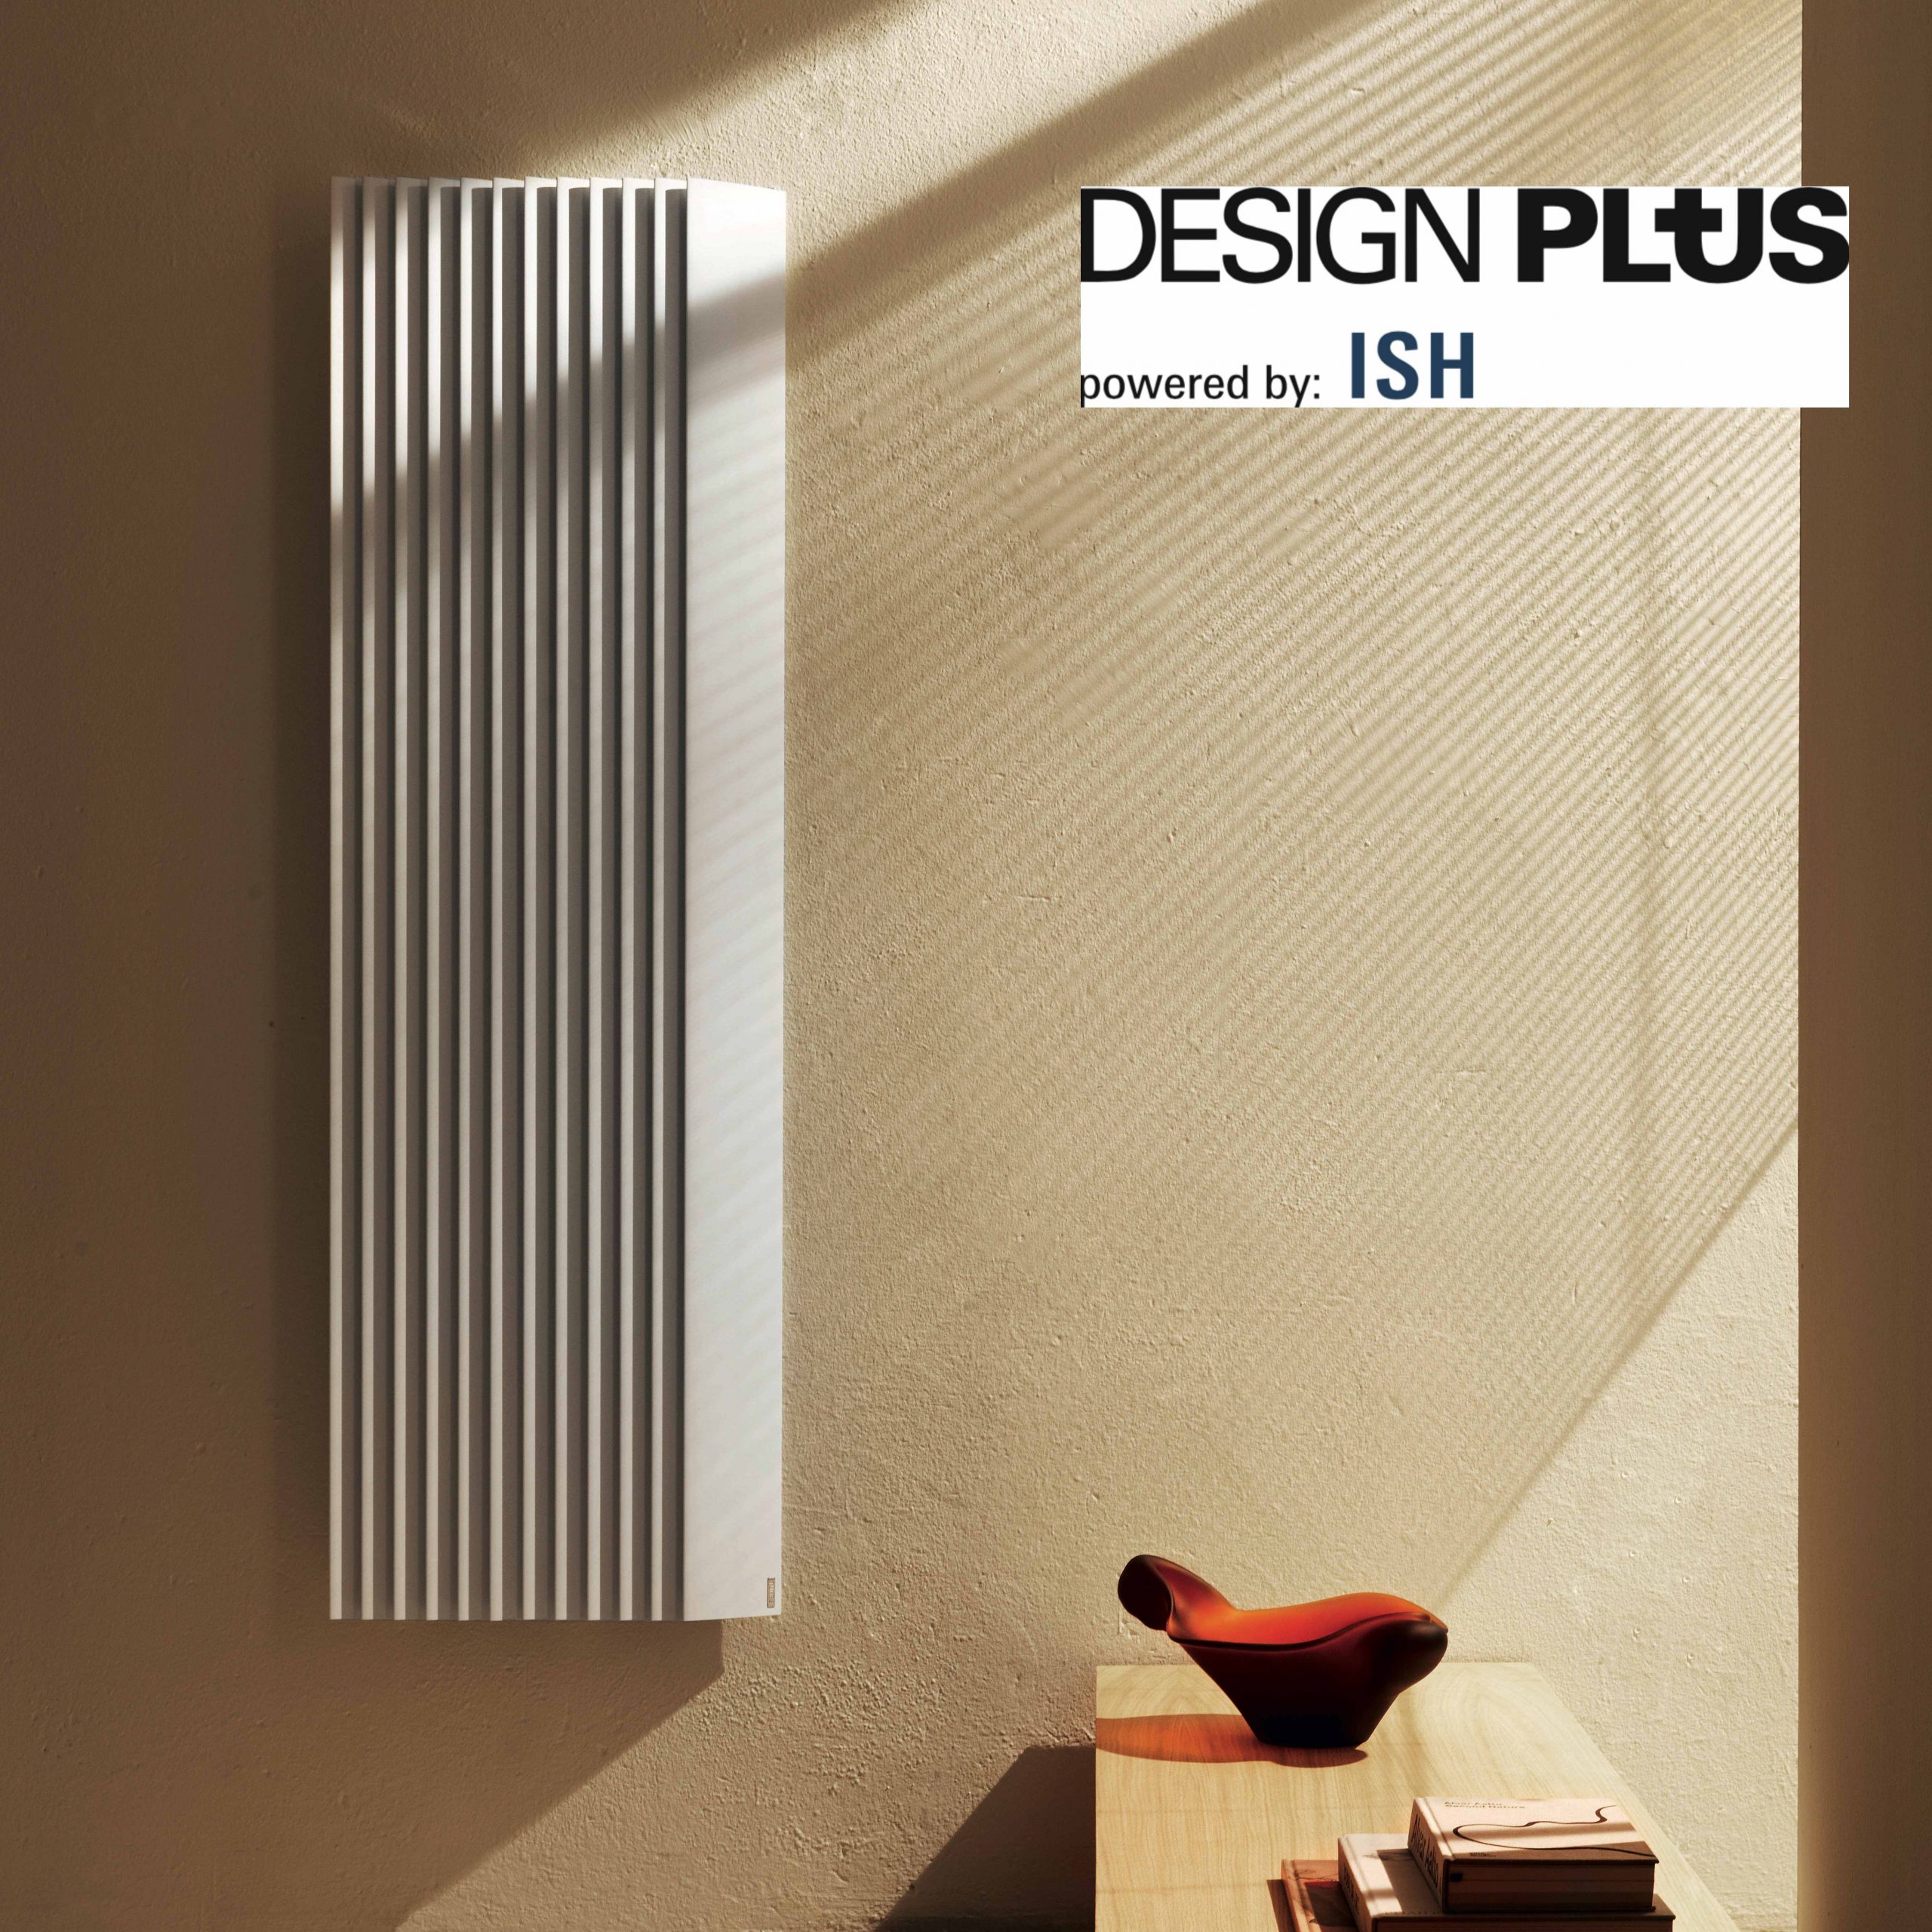 Step-by-Step wins the Design Plus powered by ISH 2019